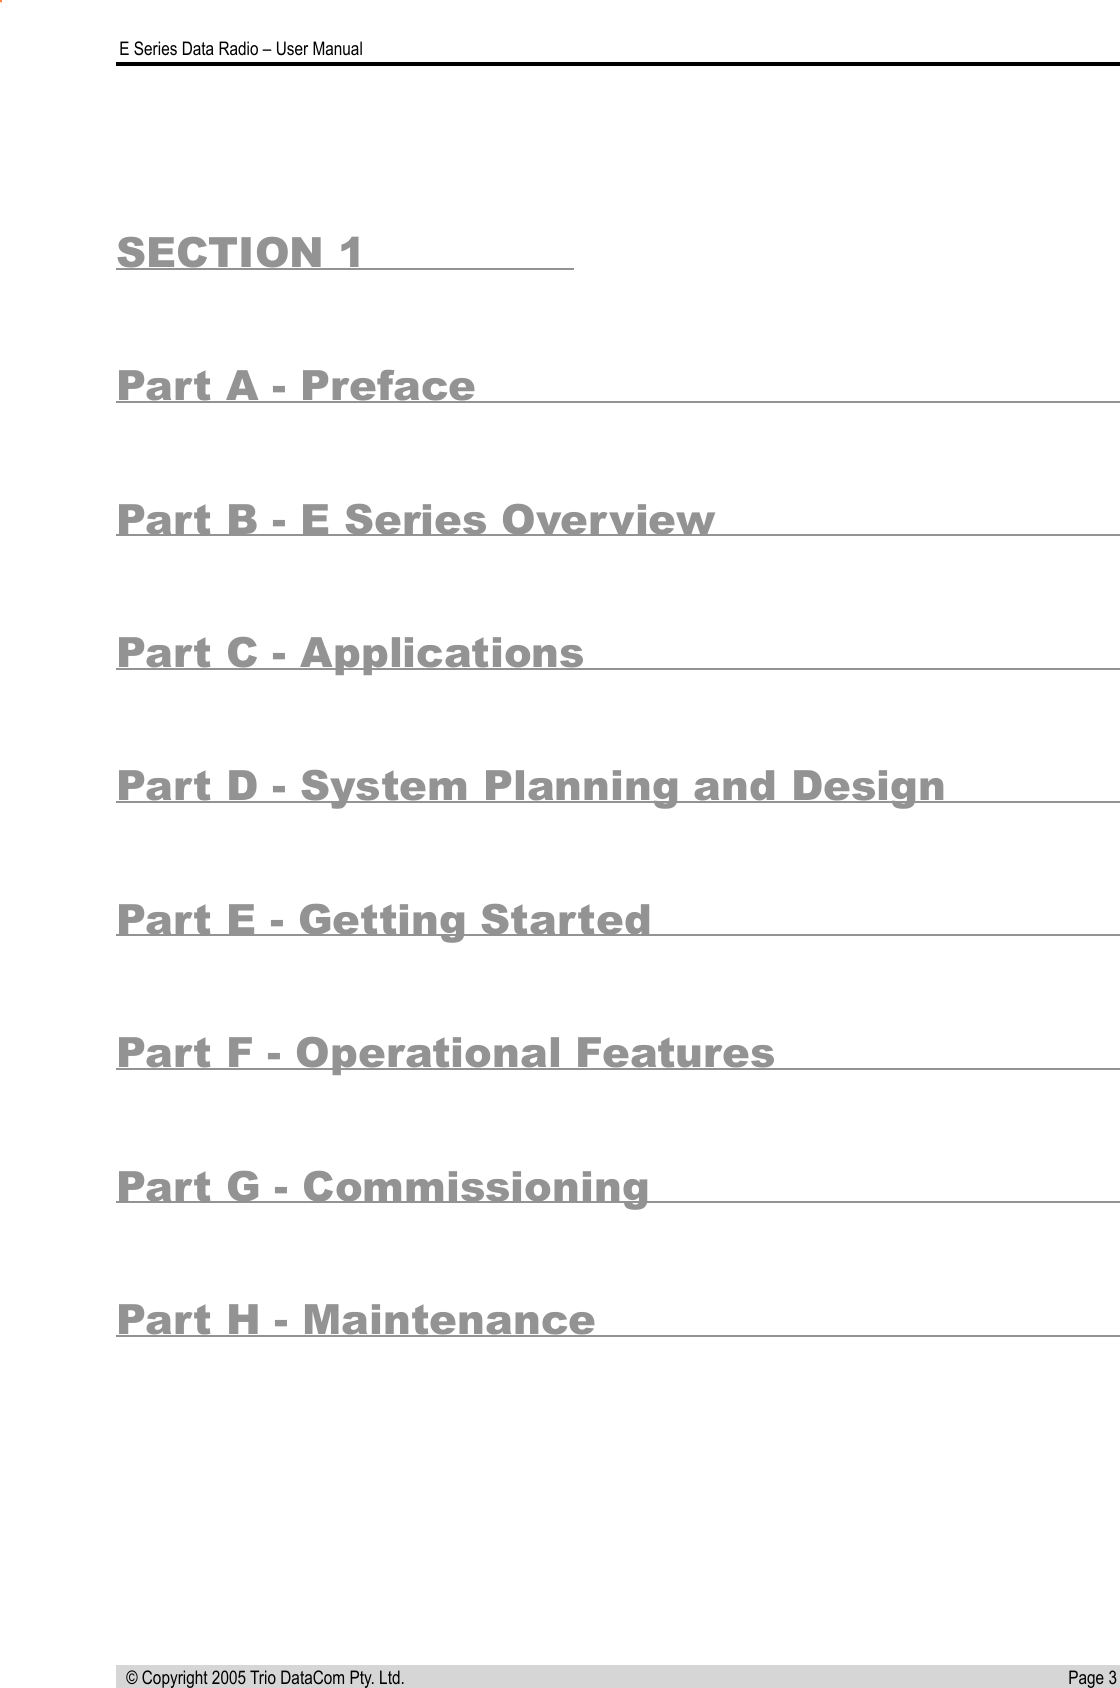 Page 3  E Series Data Radio – User Manual © Copyright 2005 Trio DataCom Pty. Ltd.SECTION 1Part A - PrefacePart B - E Series OverviewPart C - ApplicationsPart D - System Planning and DesignPart E - Getting StartedPart F - Operational FeaturesPart G - CommissioningPart H - Maintenance